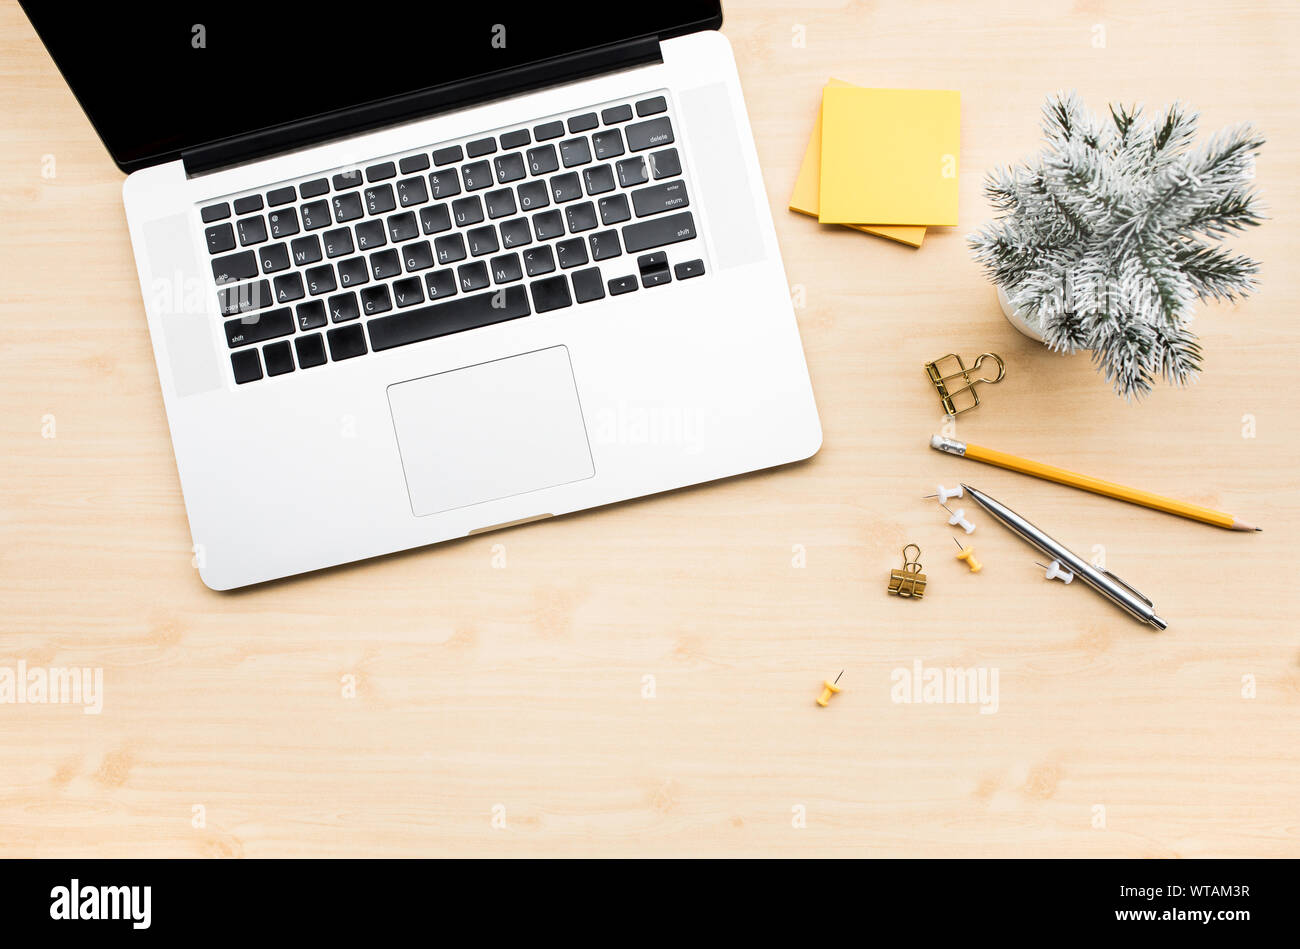 Computer laptop with accessories stationary on wood desk table background.Business flat lay mock up object Stock Photo